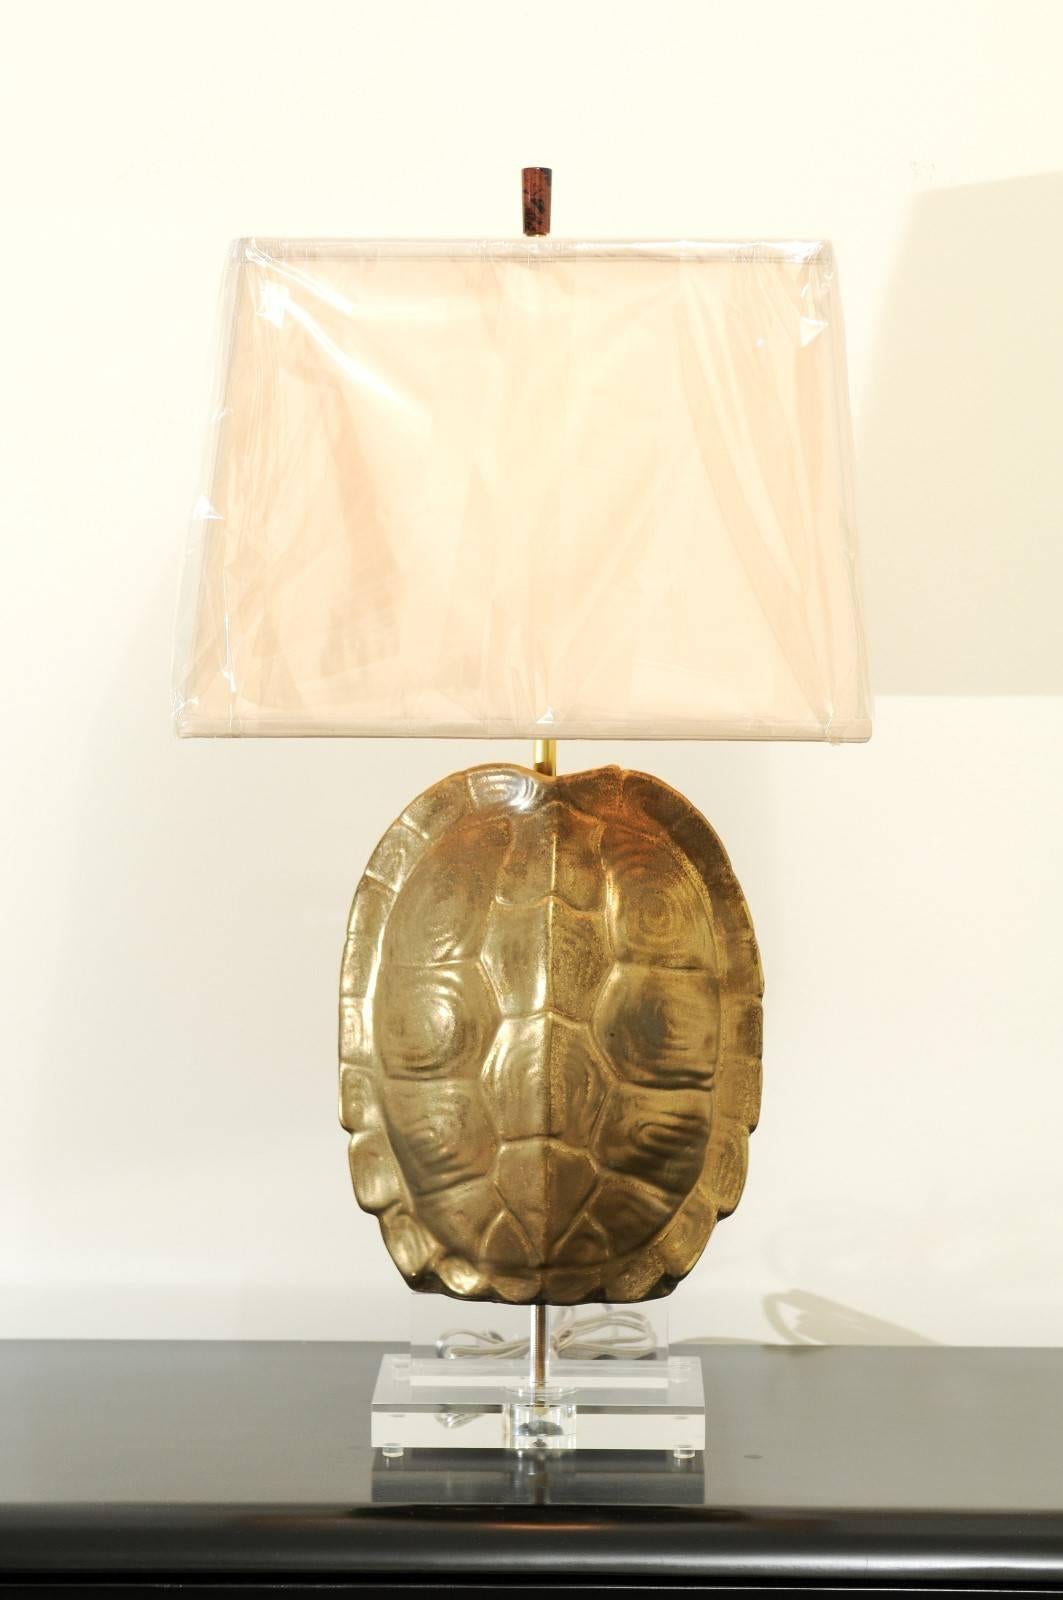 An elegant pair of custom-made faux-tortoiseshell lamps. Exacting ceramic form with beautiful detail and scale. The finish portrays the authentic look of mellowed brass. Exceptional quality and craftsmanship. Built using components of only the